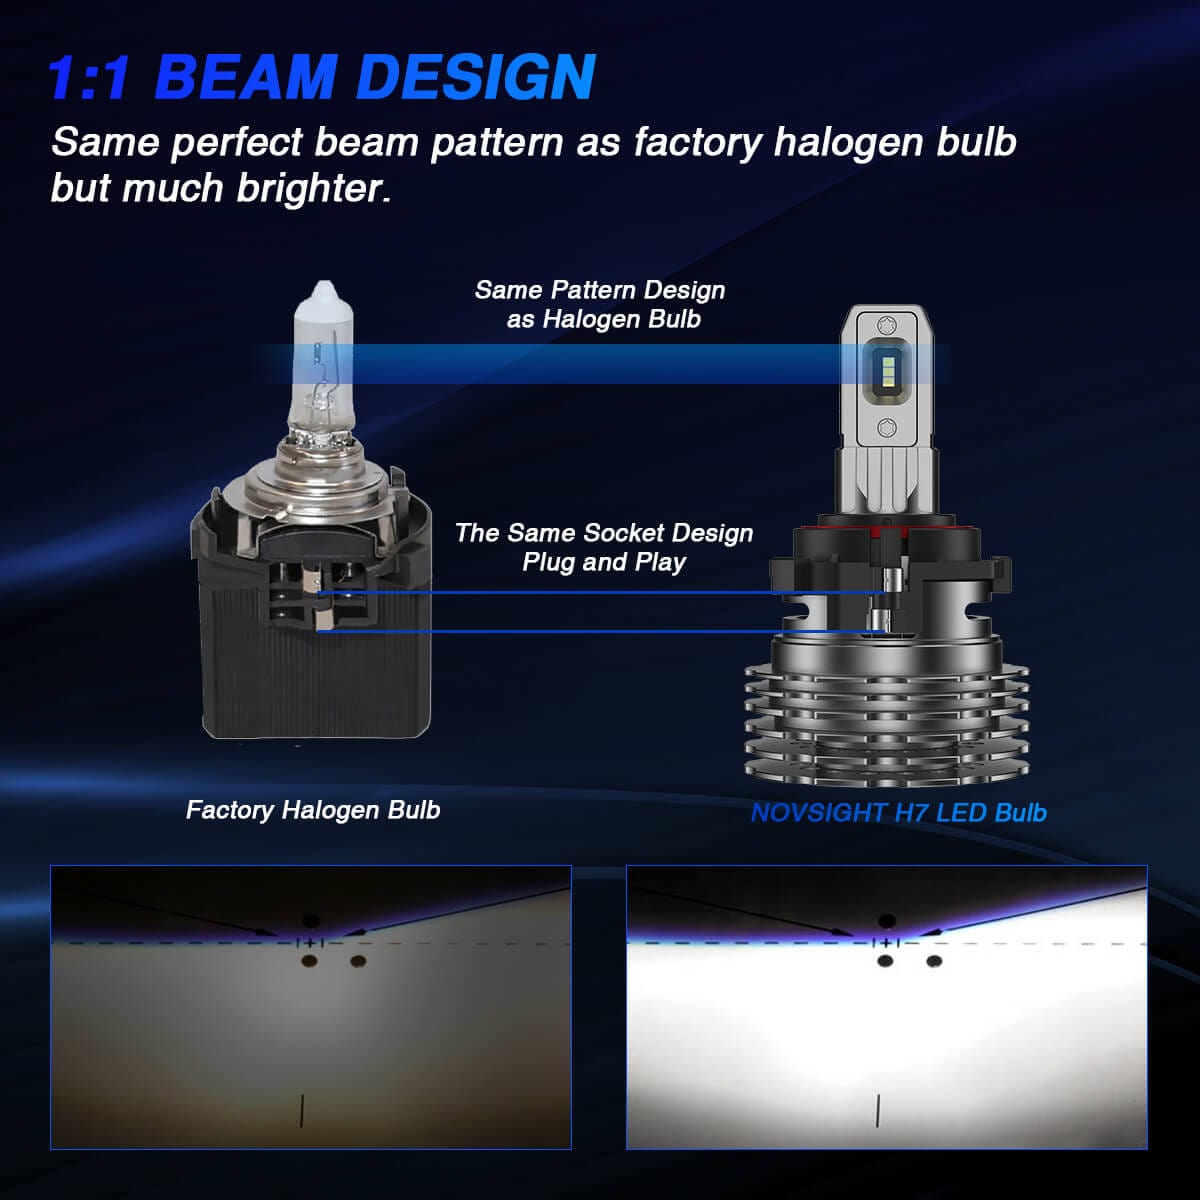 Custom H7 LED bulb 1:1 same beam as halogen but with brighter vision